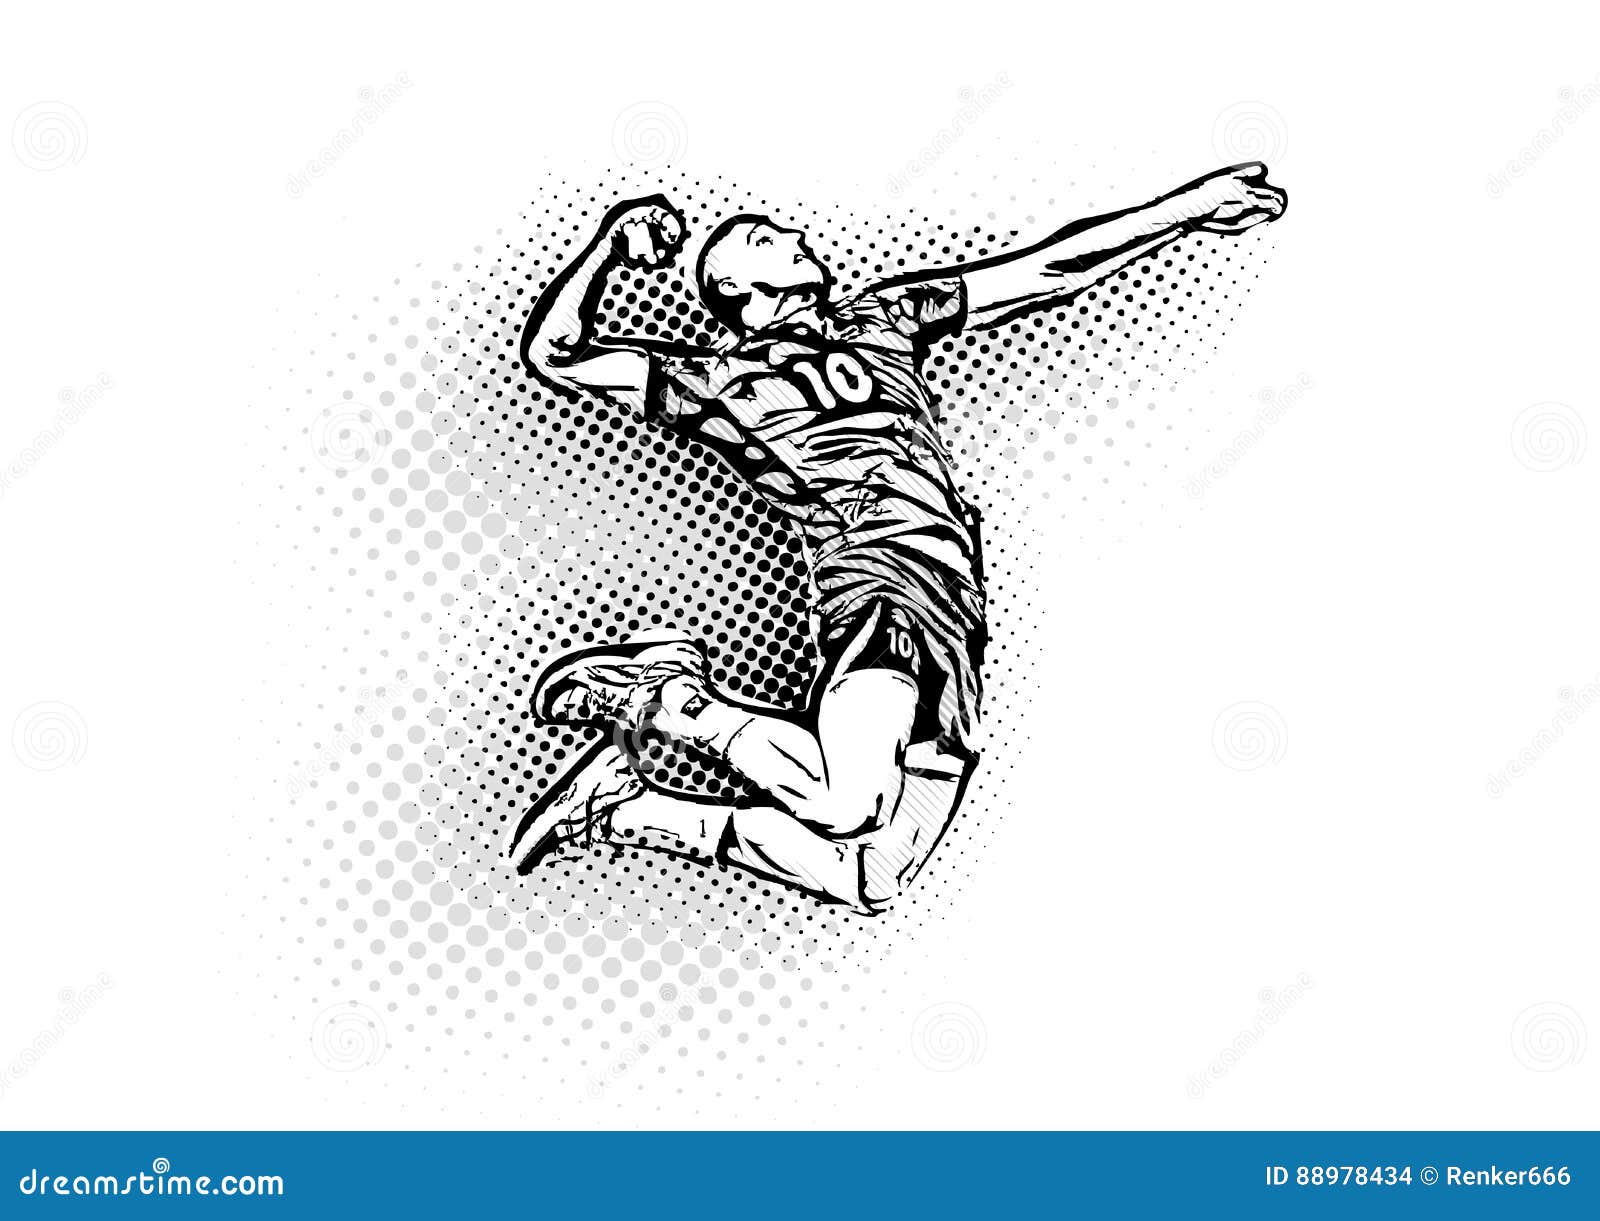 Volleyball player stock vector. Illustration of exercising - 88978434